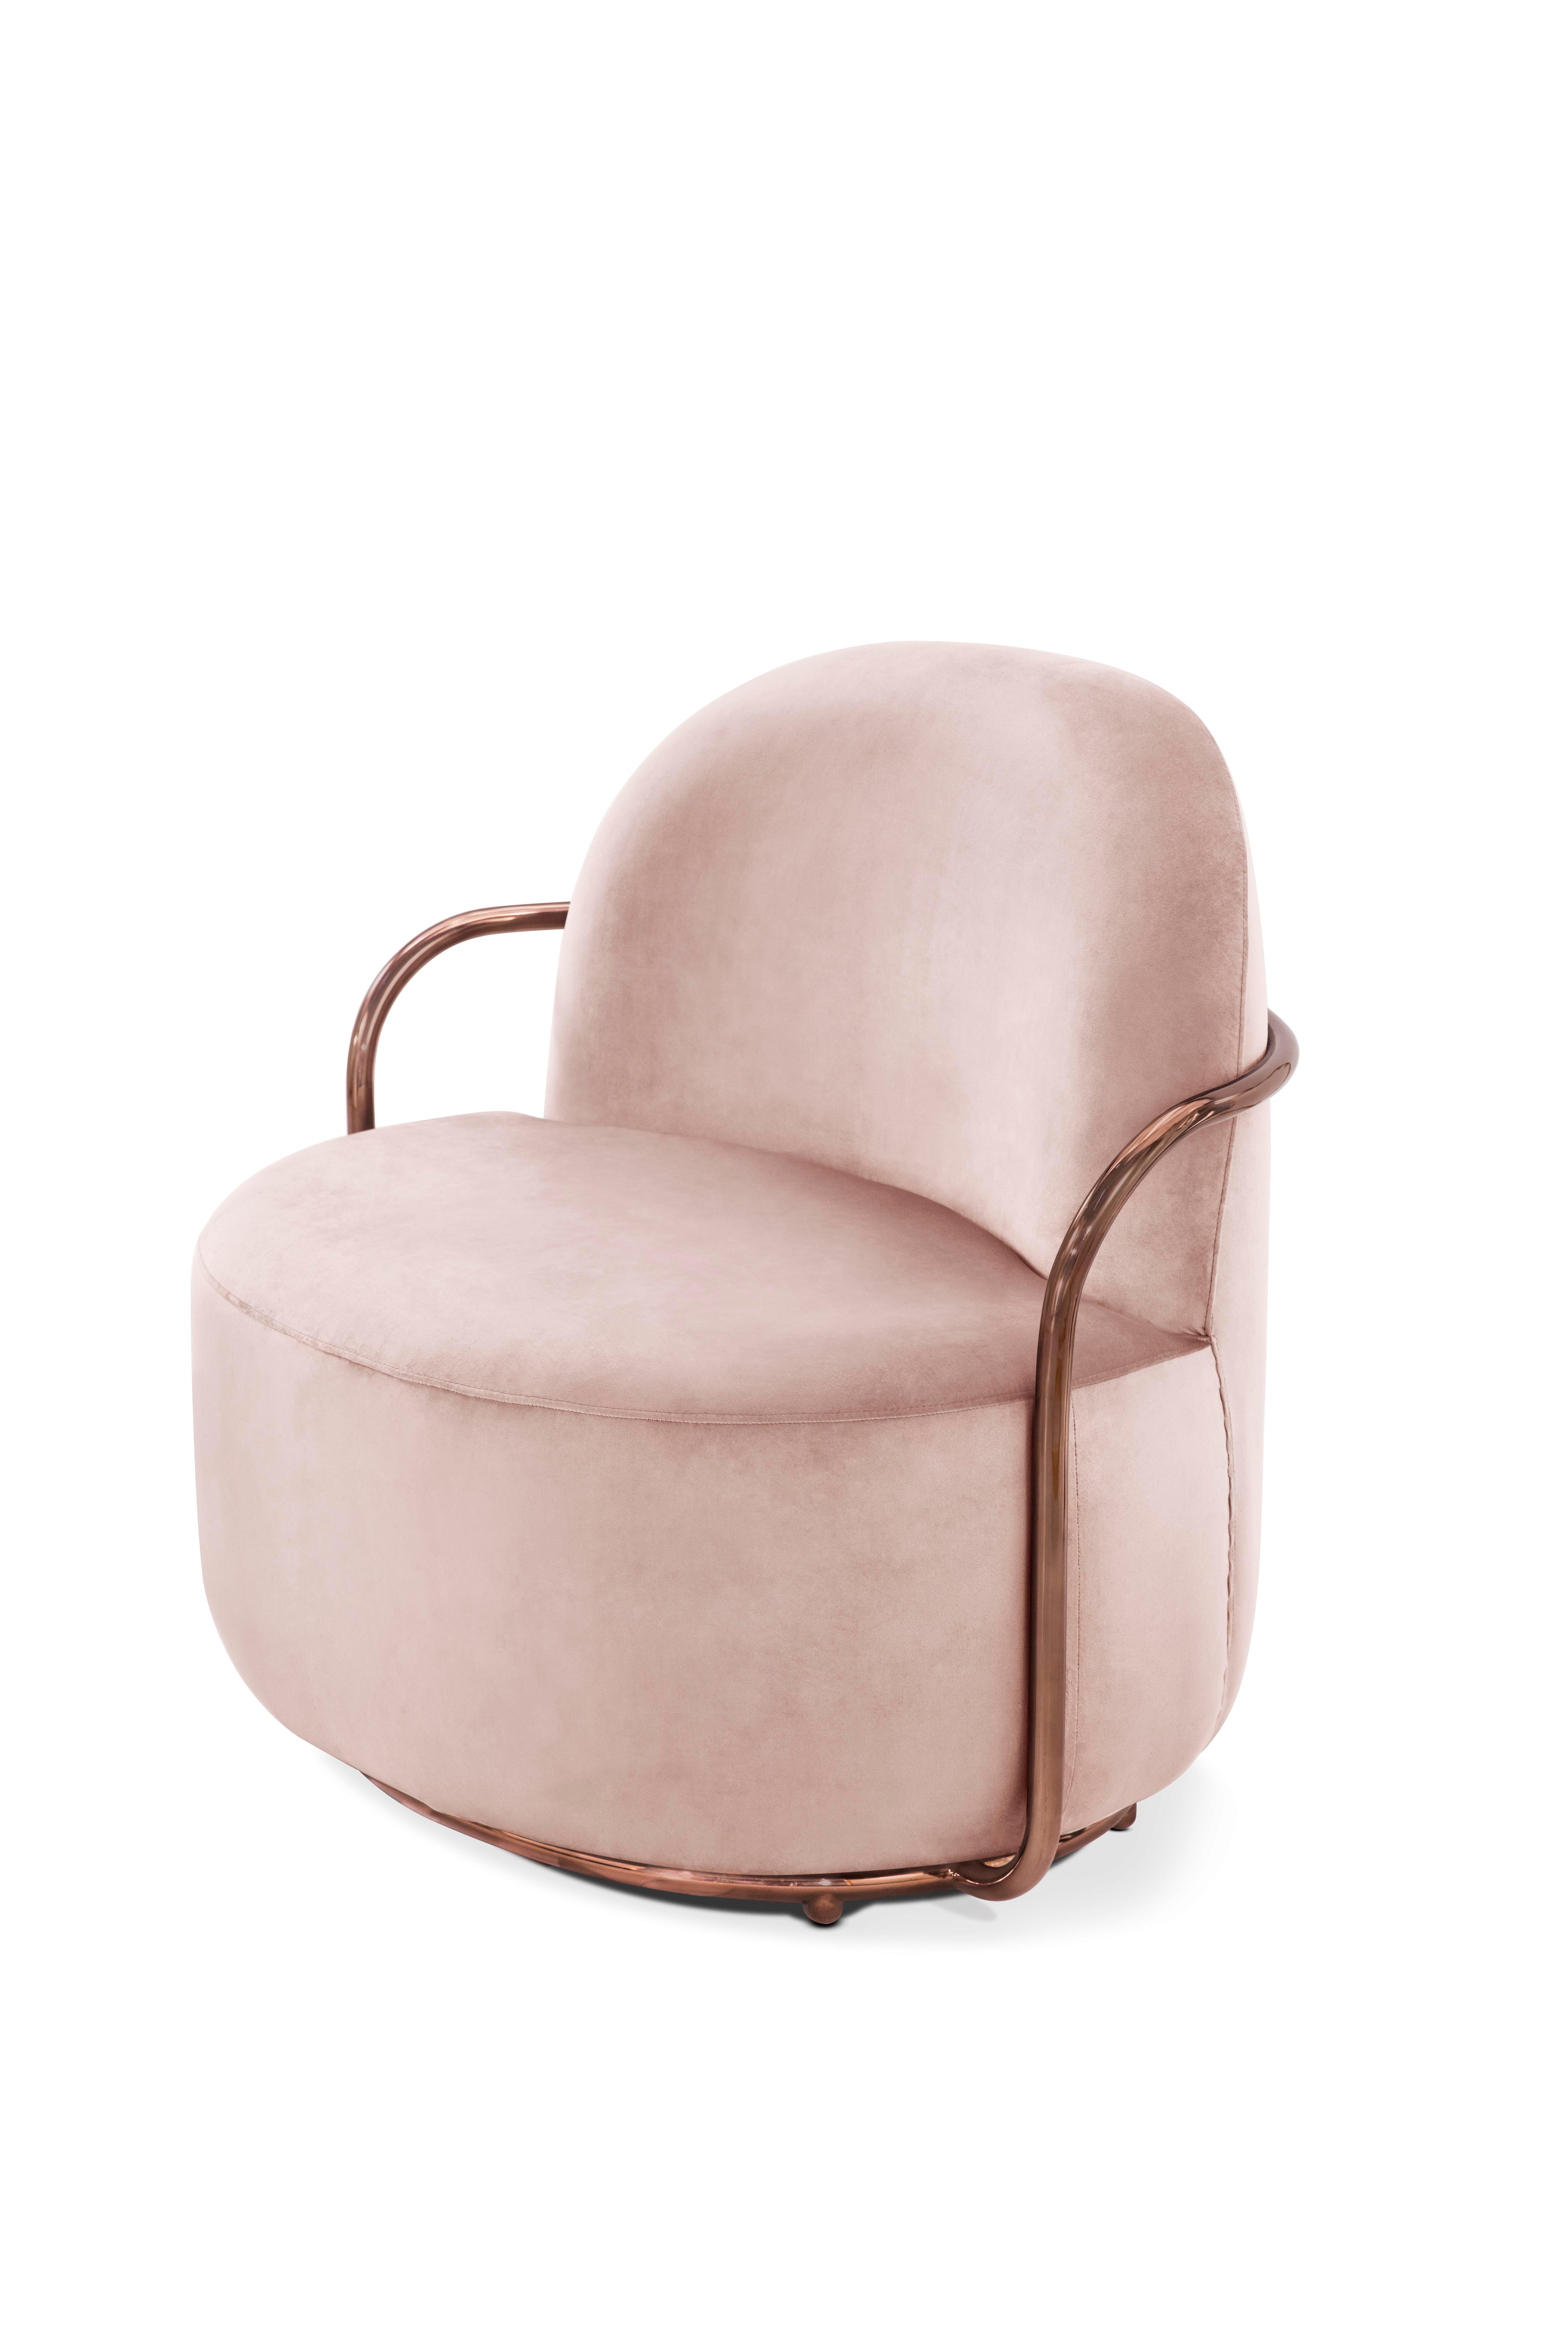 Orion Lounge Chair with Plush Pink Velvet and Rose Gold Arms by Nika Zupanc makes a pretty picture in pale pink velvet and rich rose gold metal arms.

Nika Zupanc, a strikingly renowned Slovenian designer, never shies away from redefining the status